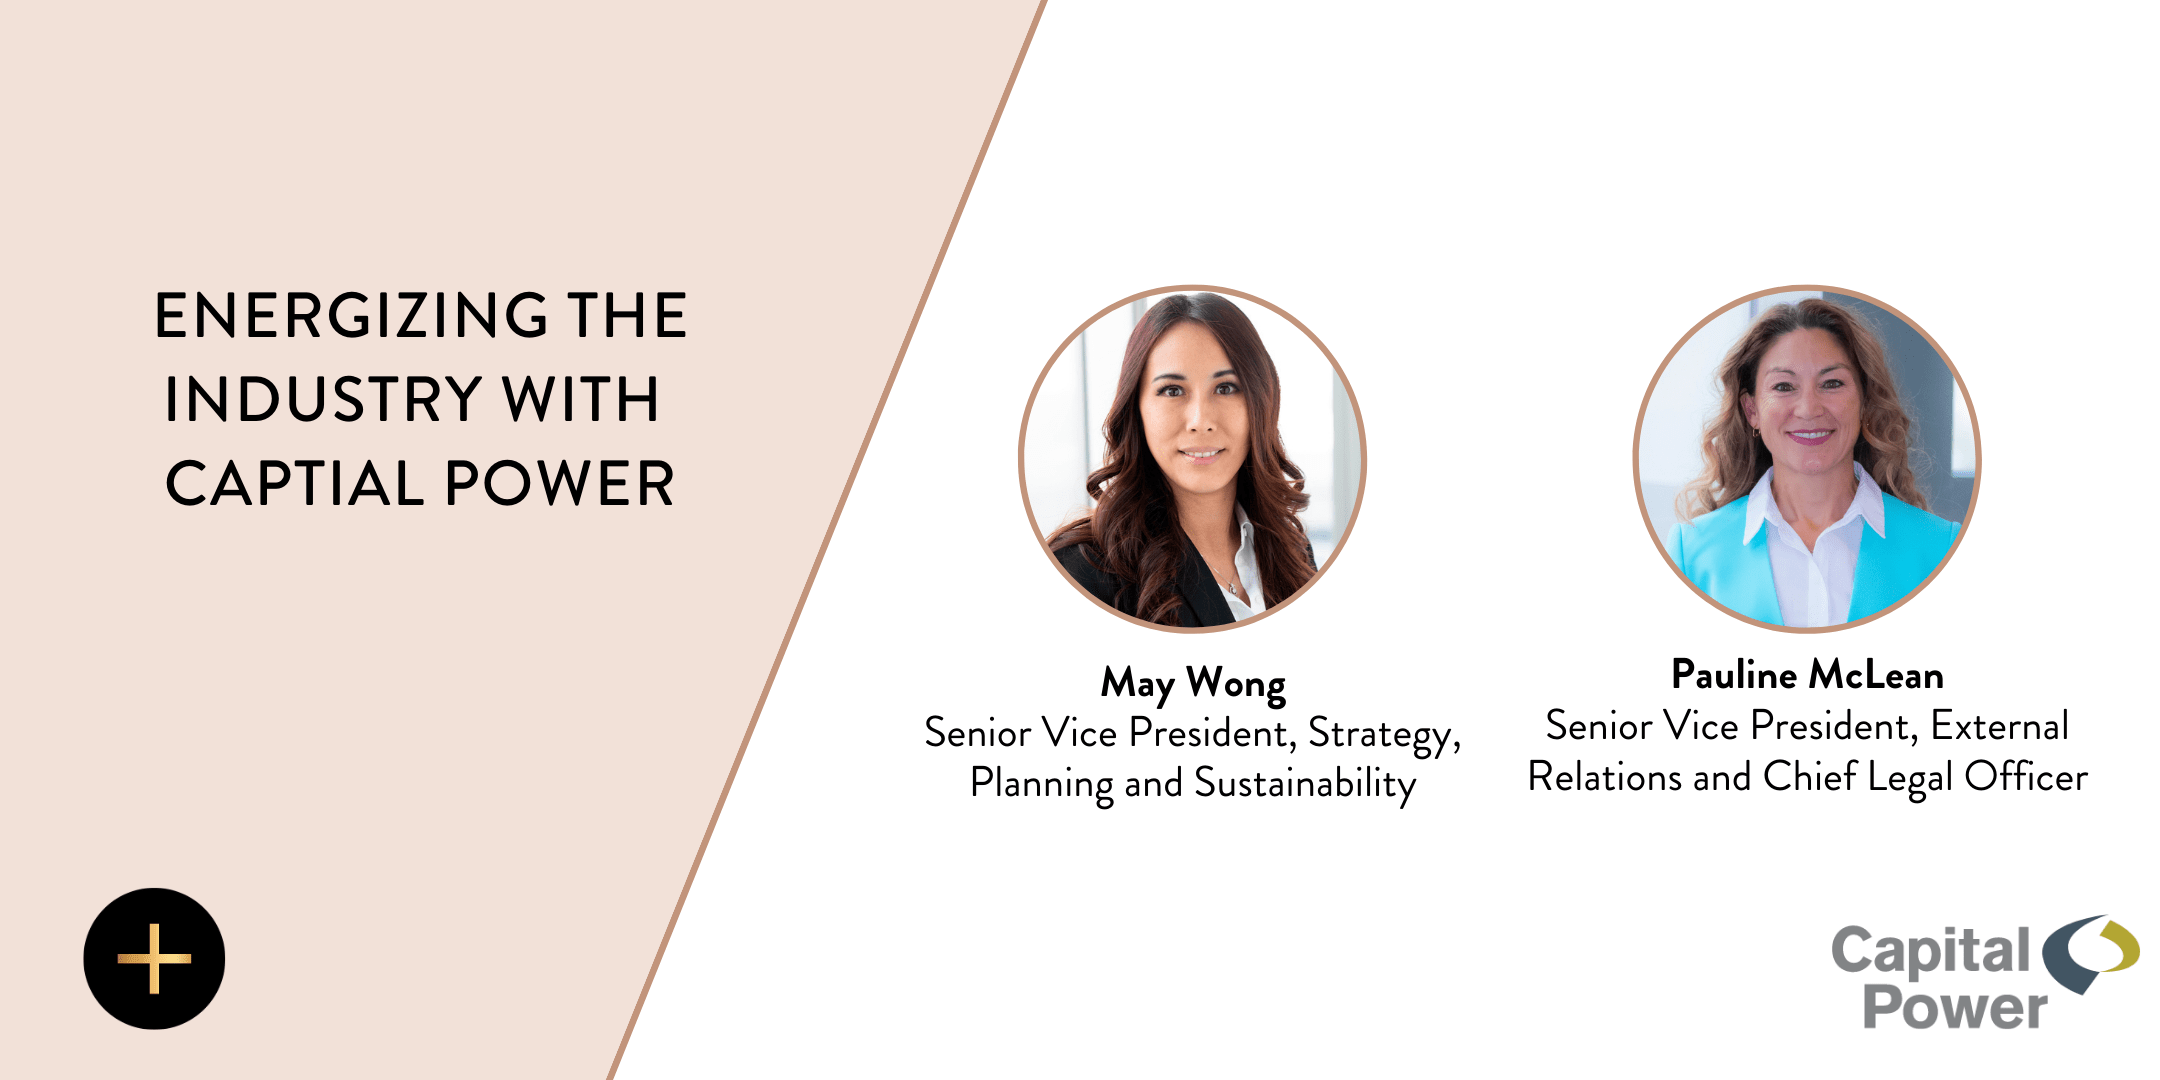 Energizing The Industry. Capital Power recently expanded its Executive Team. Meet May Wong and Pauline McLean.